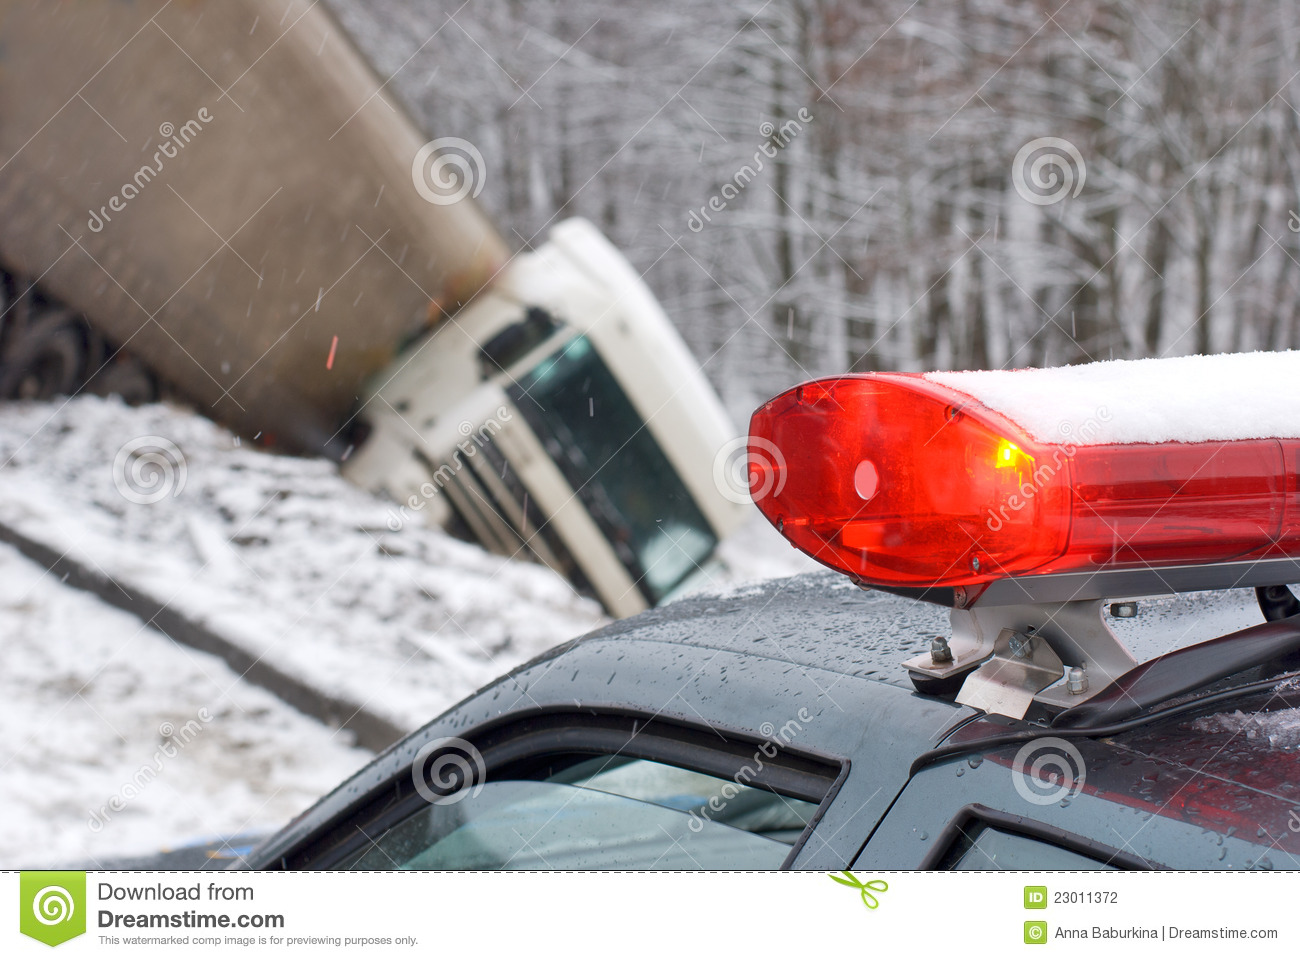 Big Truck Was Crashed On Winter Road 